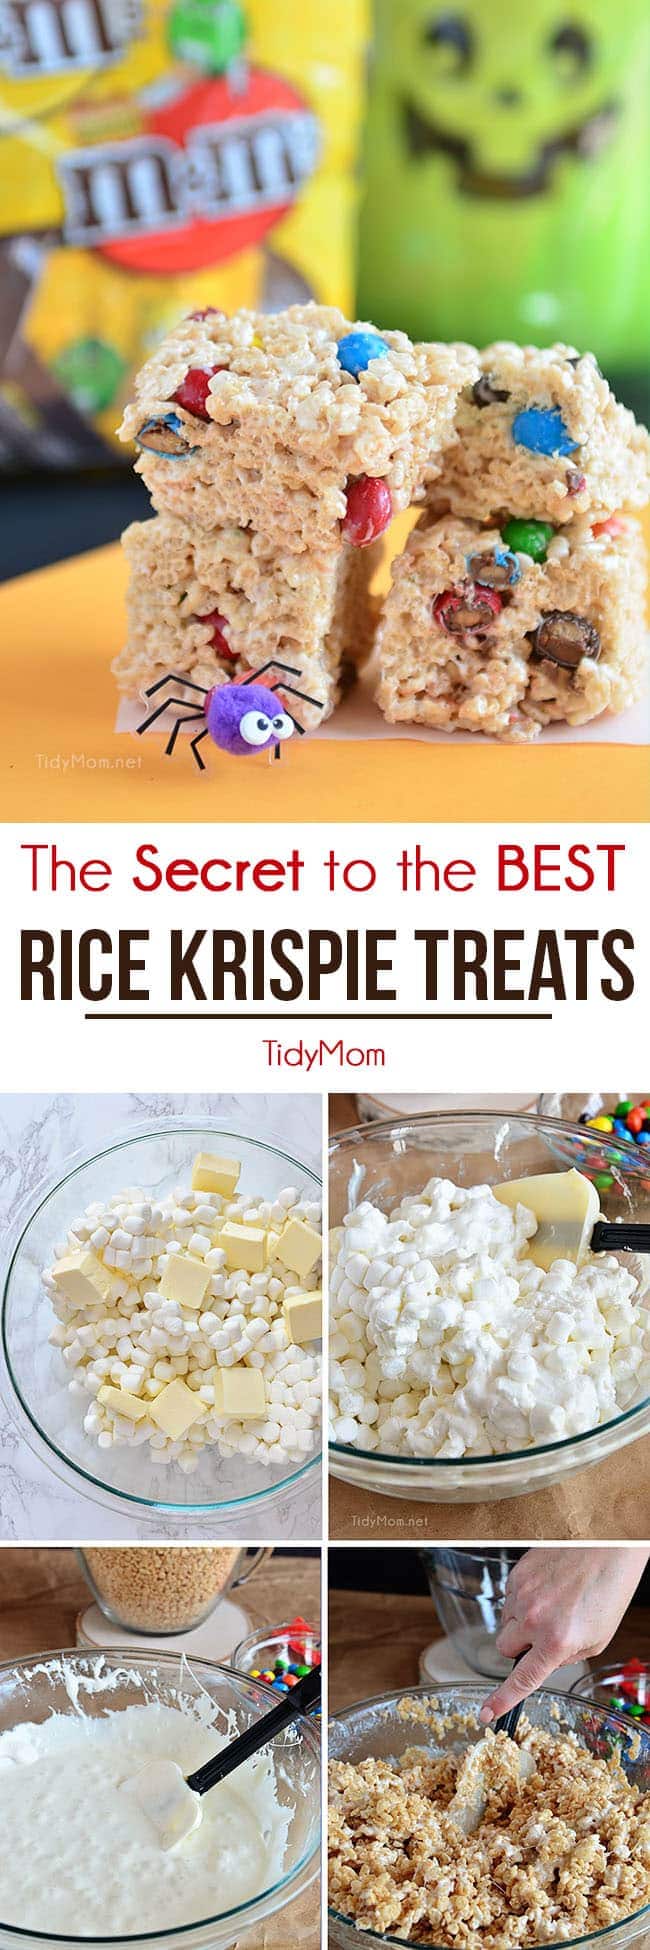 Learn the secret and tips on how to make the best rice krispie treats at home!! The BEST Rice Krispie Treats are soft and gooey with just a hint of butter. Recipe at TidyMom.net